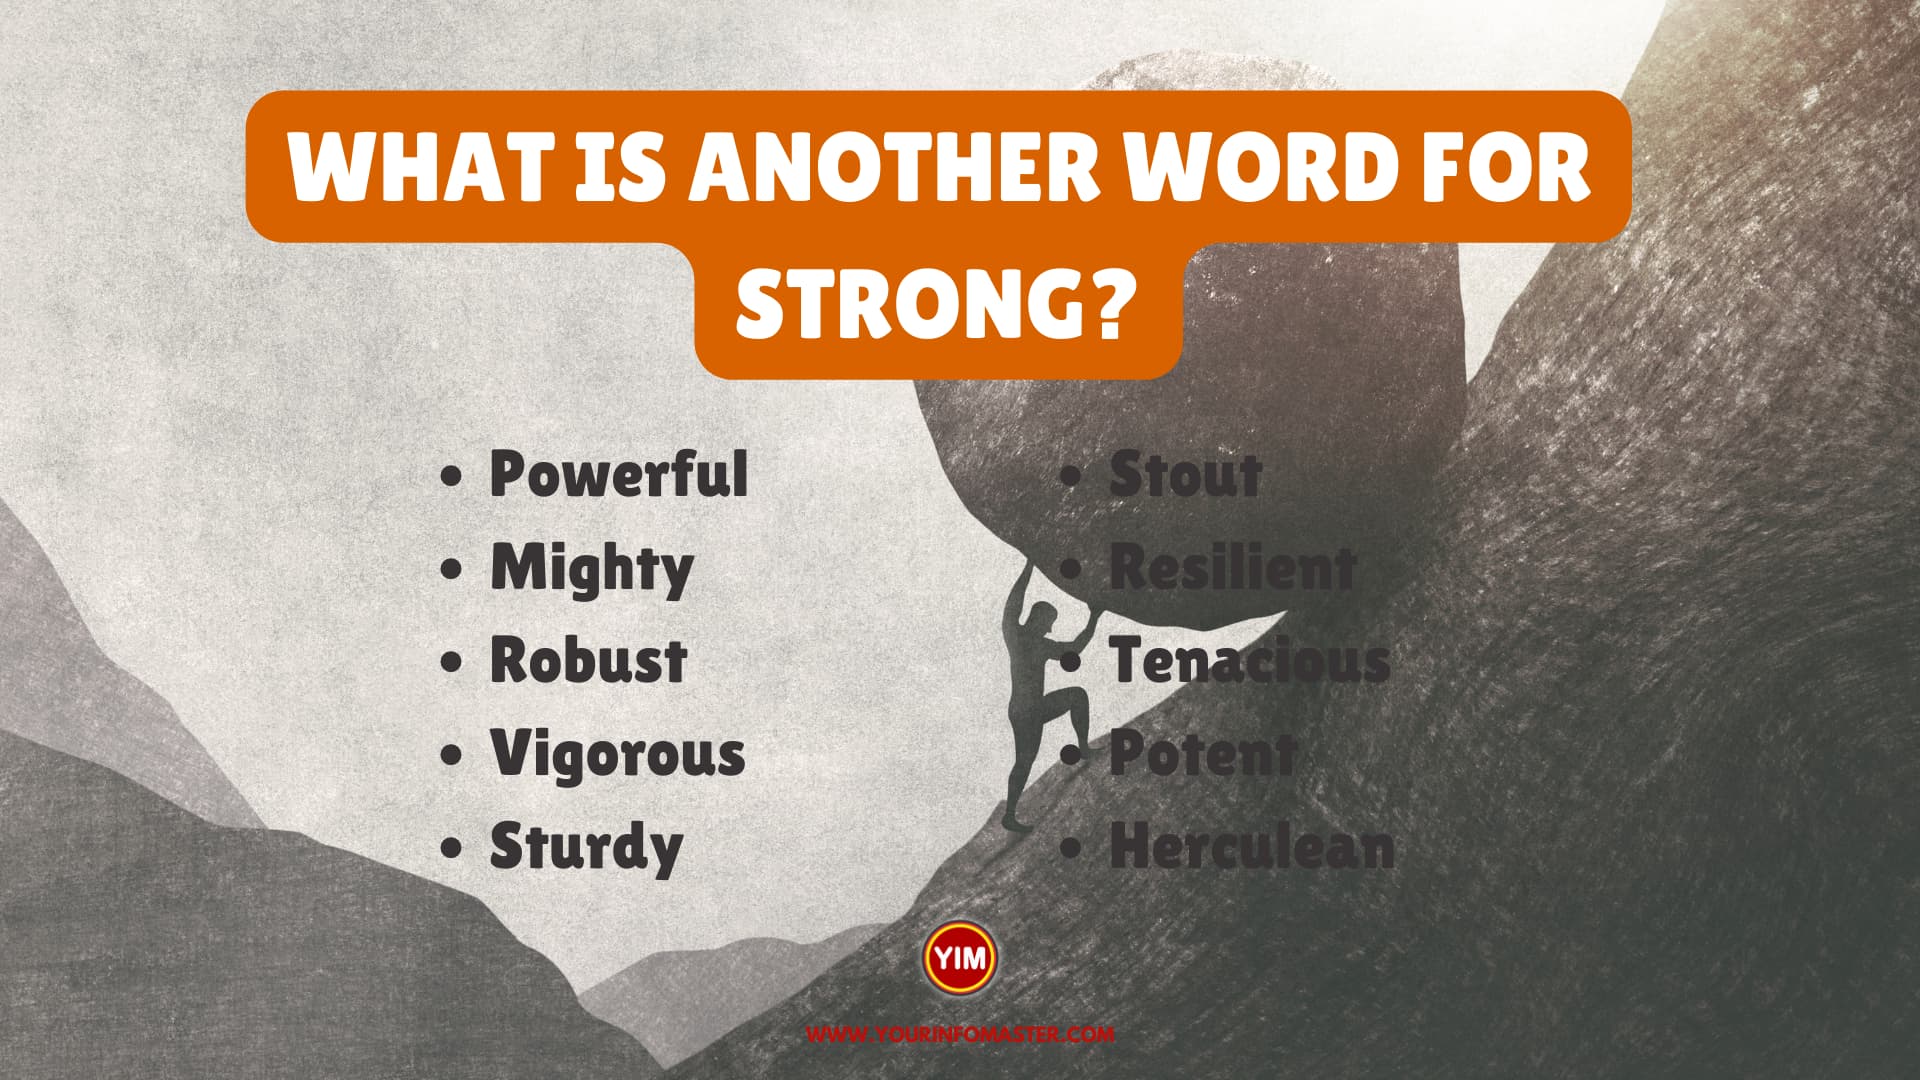 What is another word for Strong